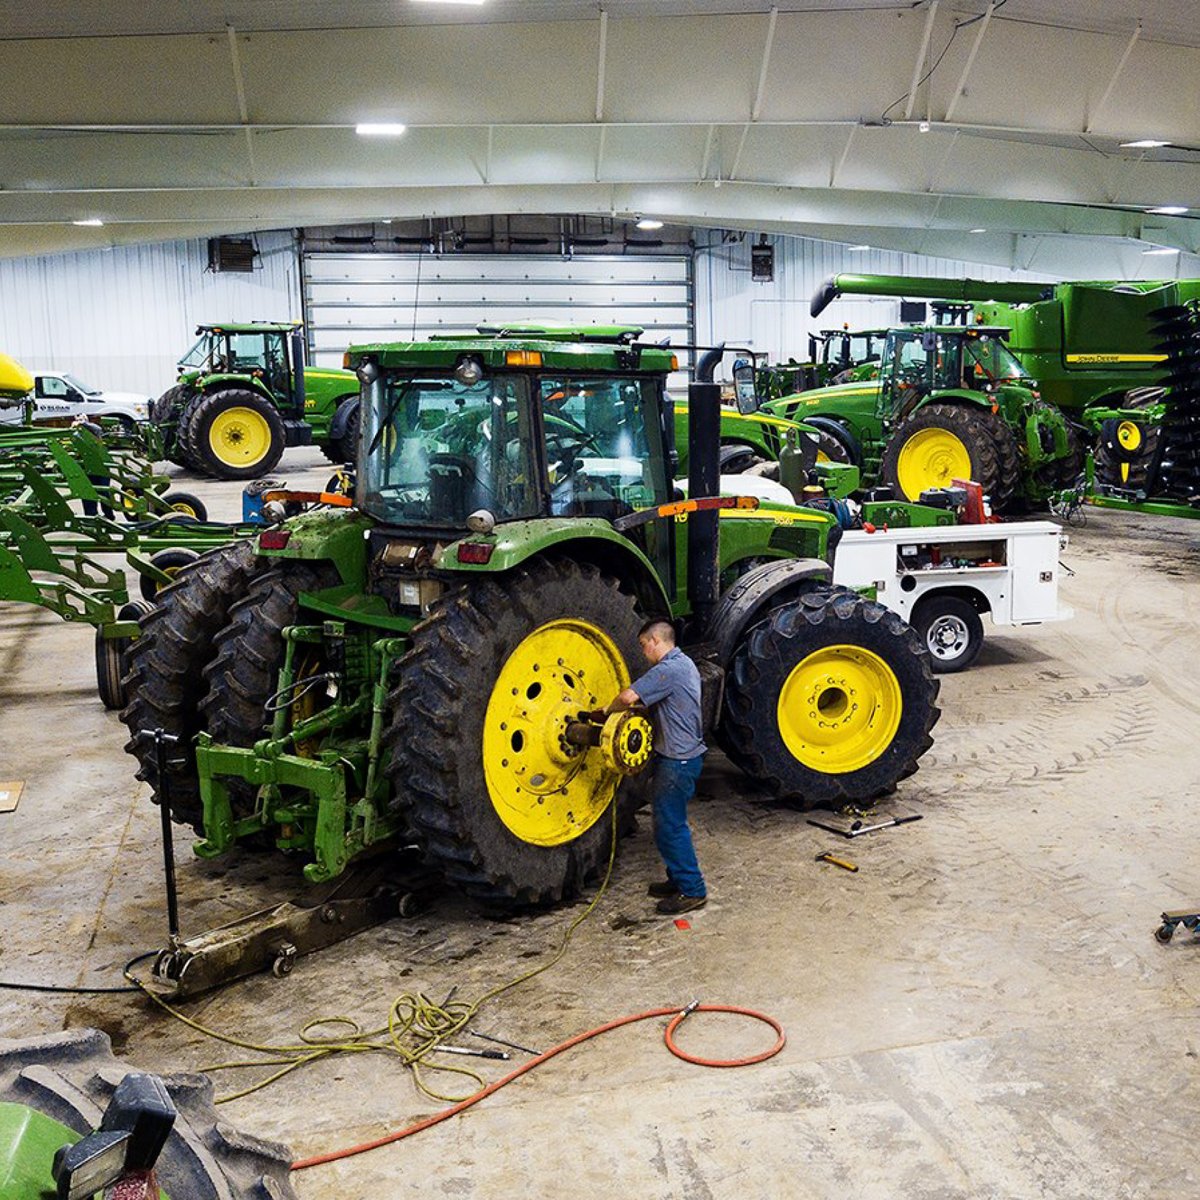 Did you know that Sloan Implement is looking to sponsor students through diesel technology programs to aid in our hunt for service technicians? 💻🪛🔧 Find out more at sloans.com/career - #johndeerecareer #johndeere #dieseltech #technicianlife #sloans #sloanimplement